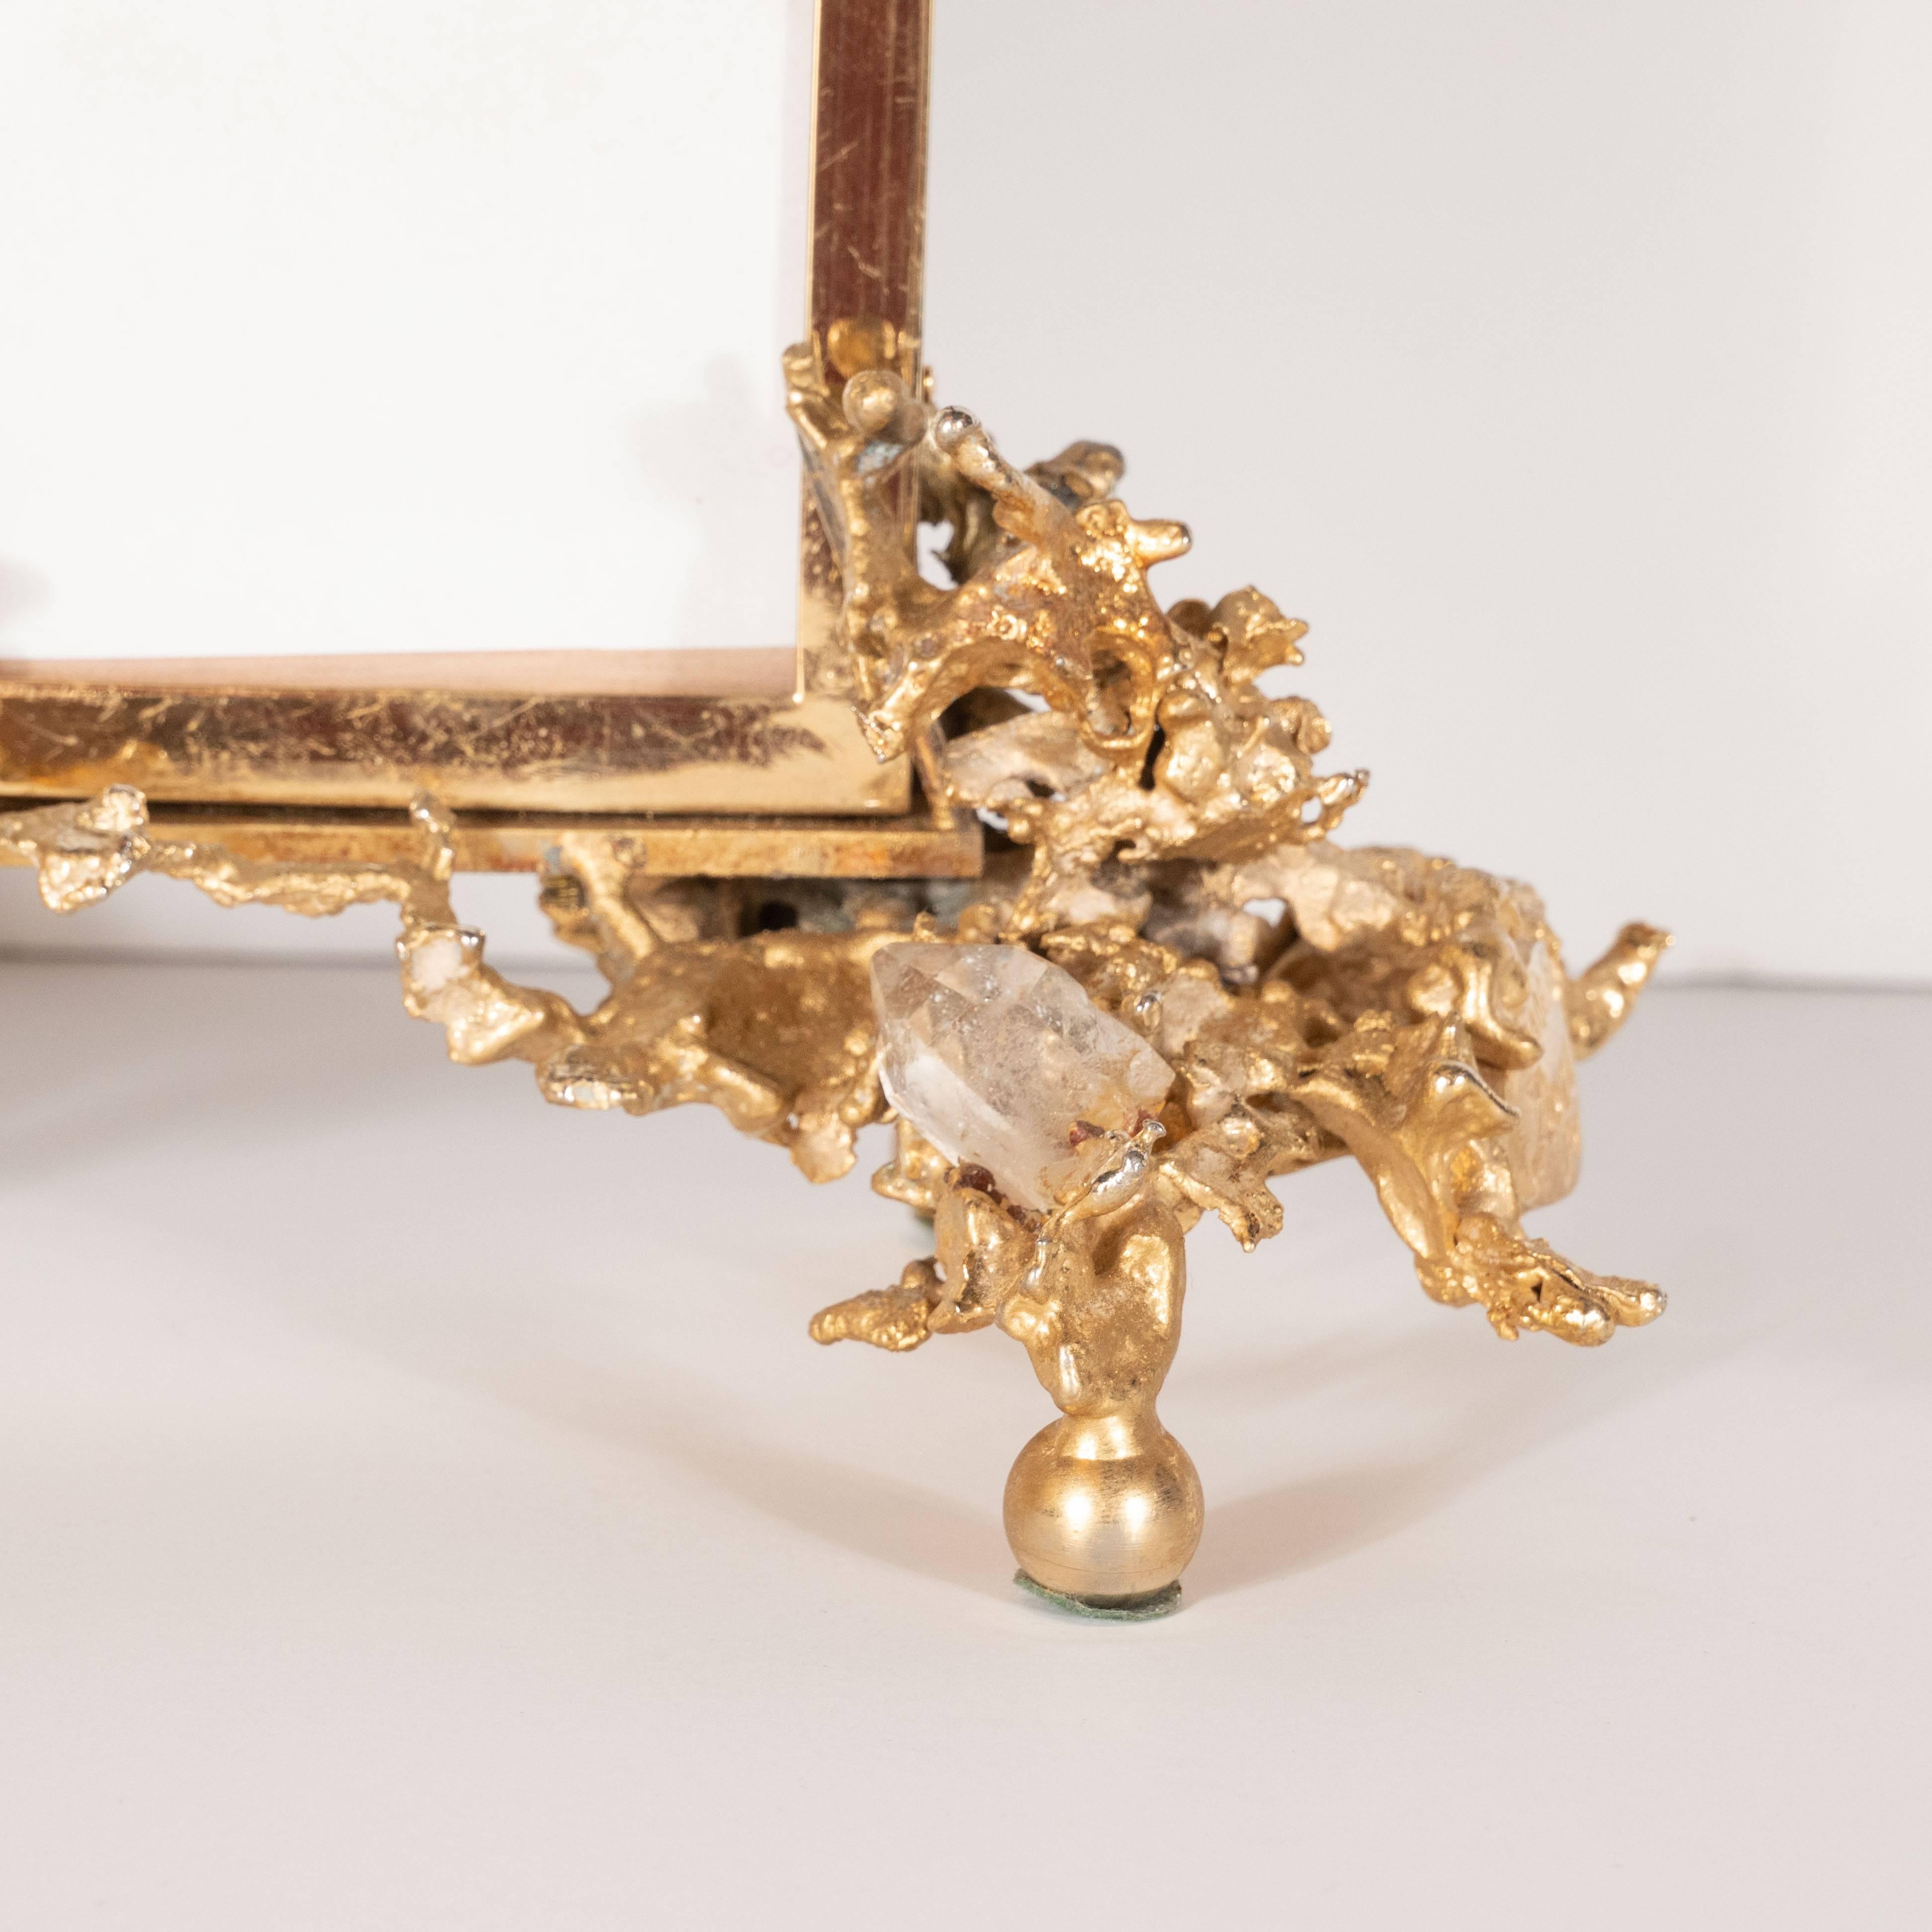 This unique and captivating modernist picture frame was realized by the esteemed midcentury artist Claude Victor Boeltz, circa 1970. It features an exploded, liquid- like form created using 24 karat gold bronze with prismatic clusters of natural